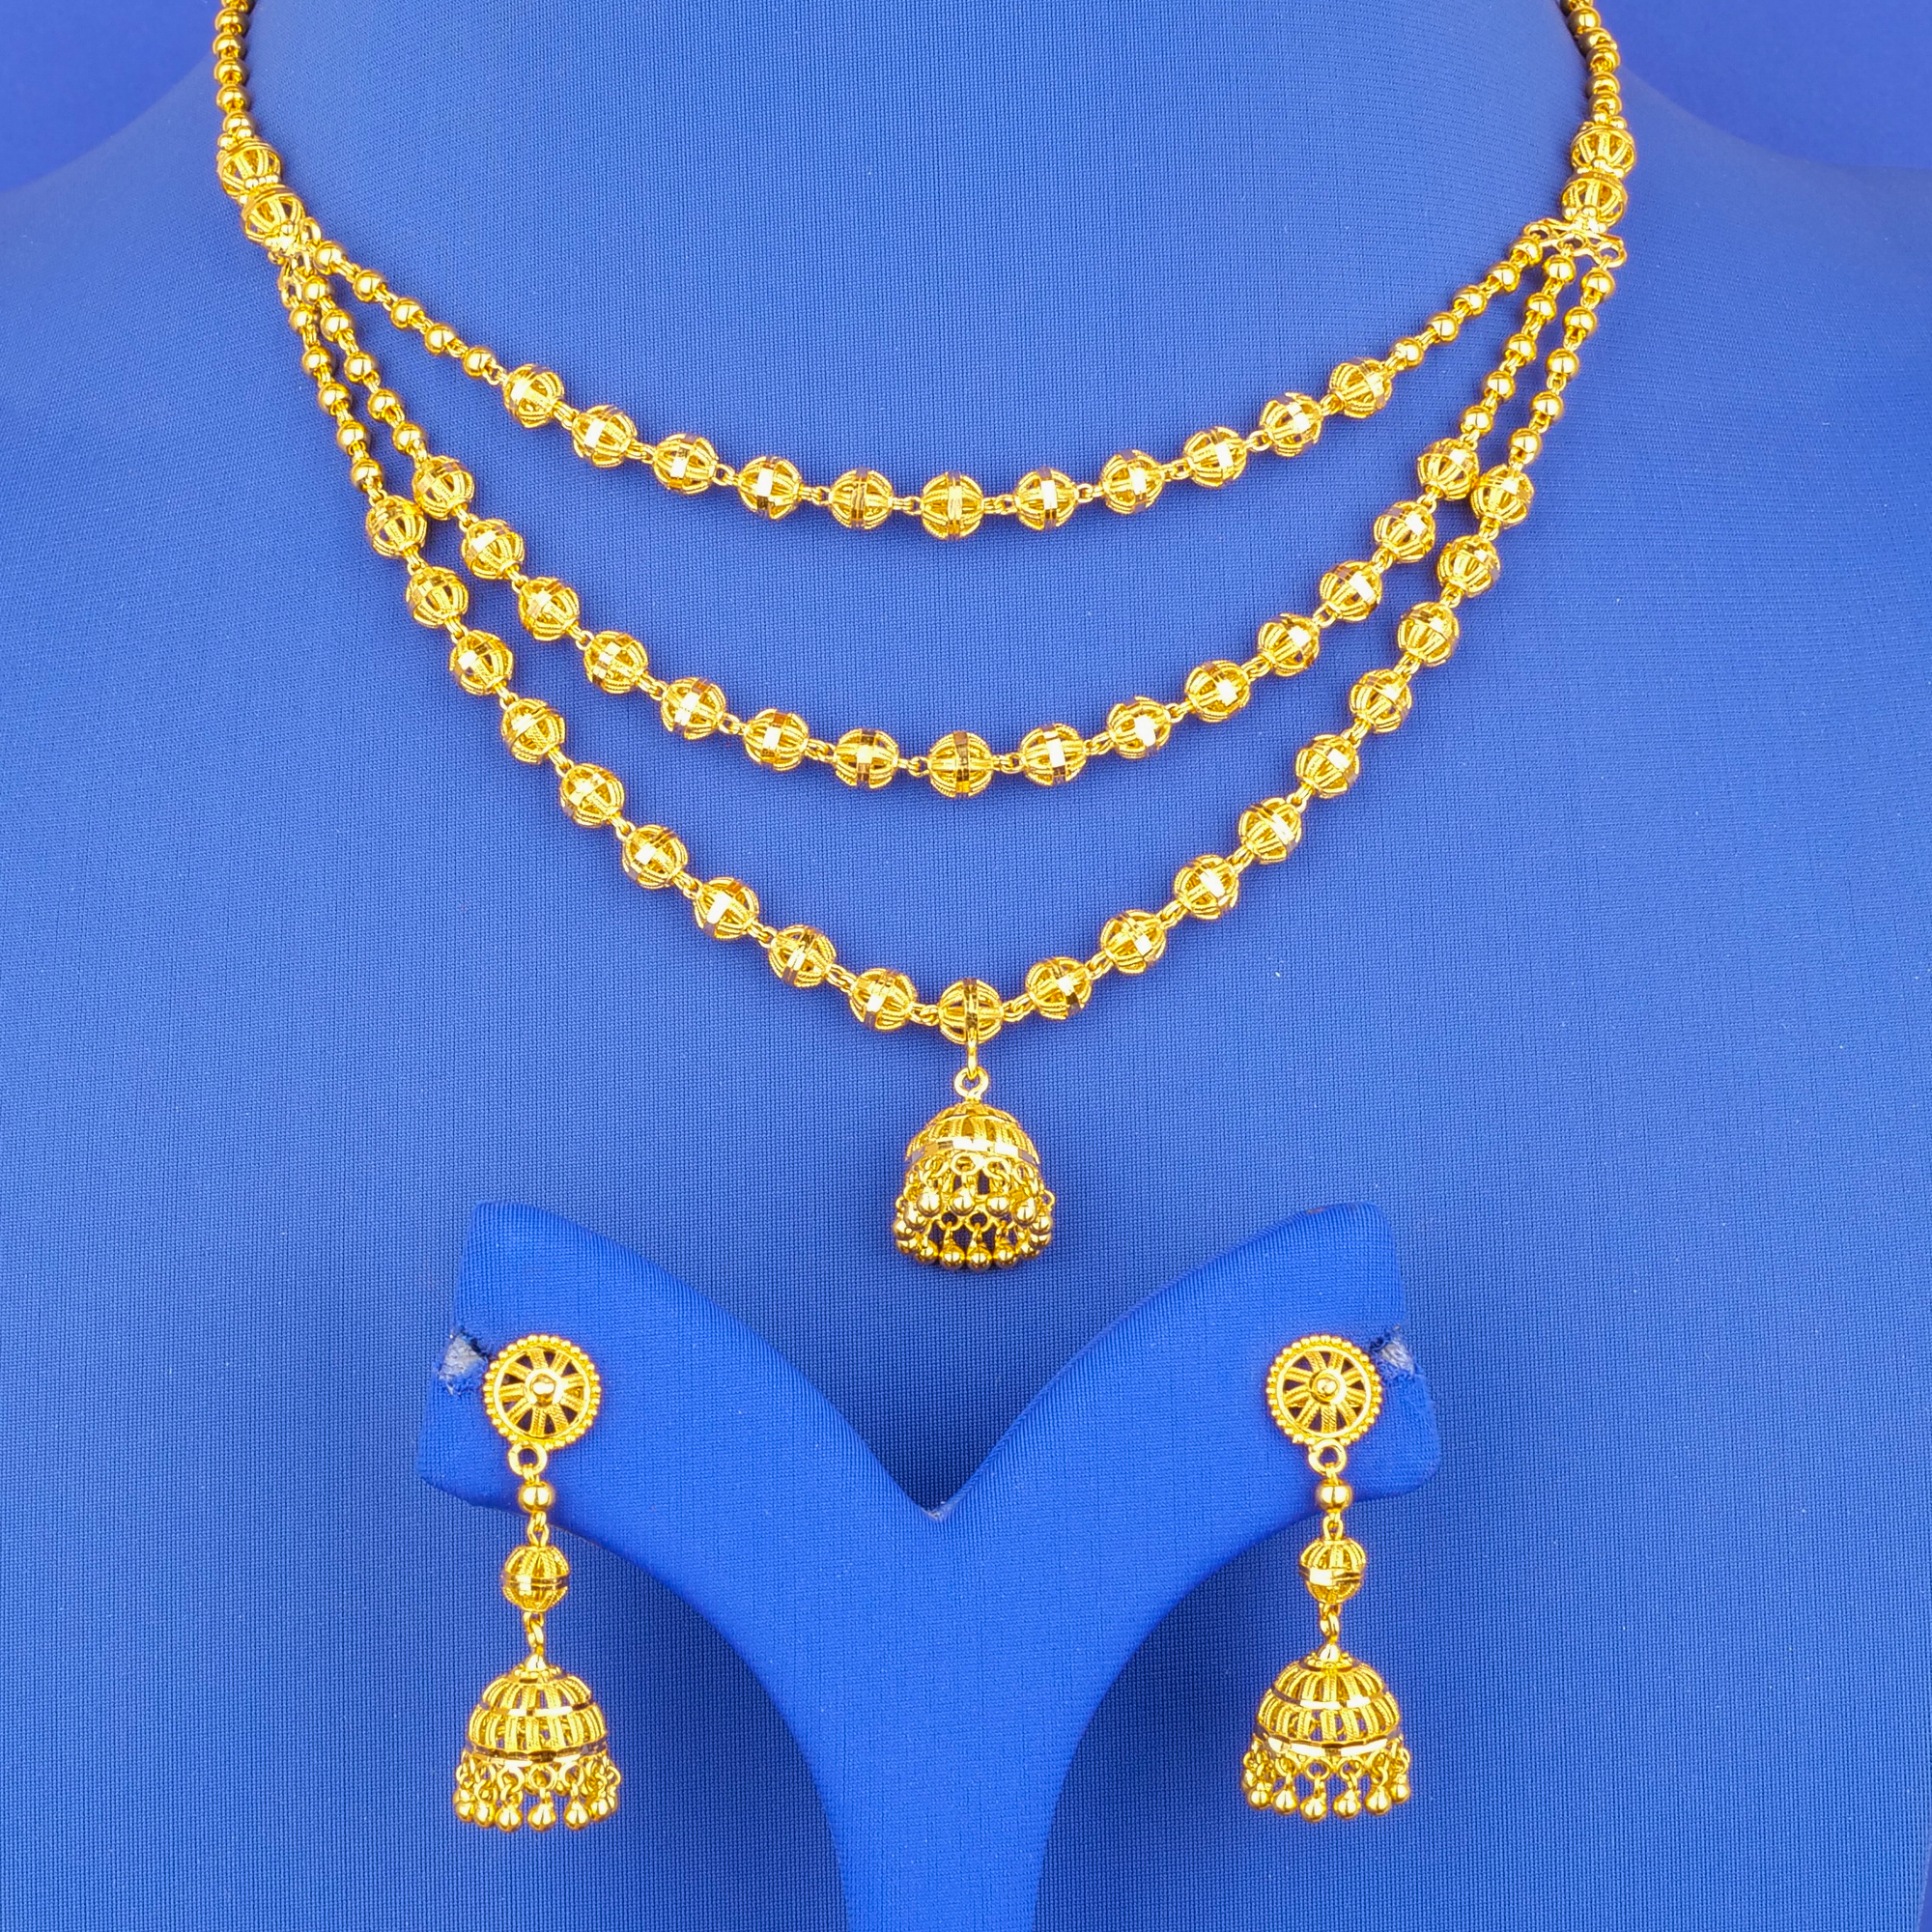 22K Gold 'Layered' Necklace and Earring Set